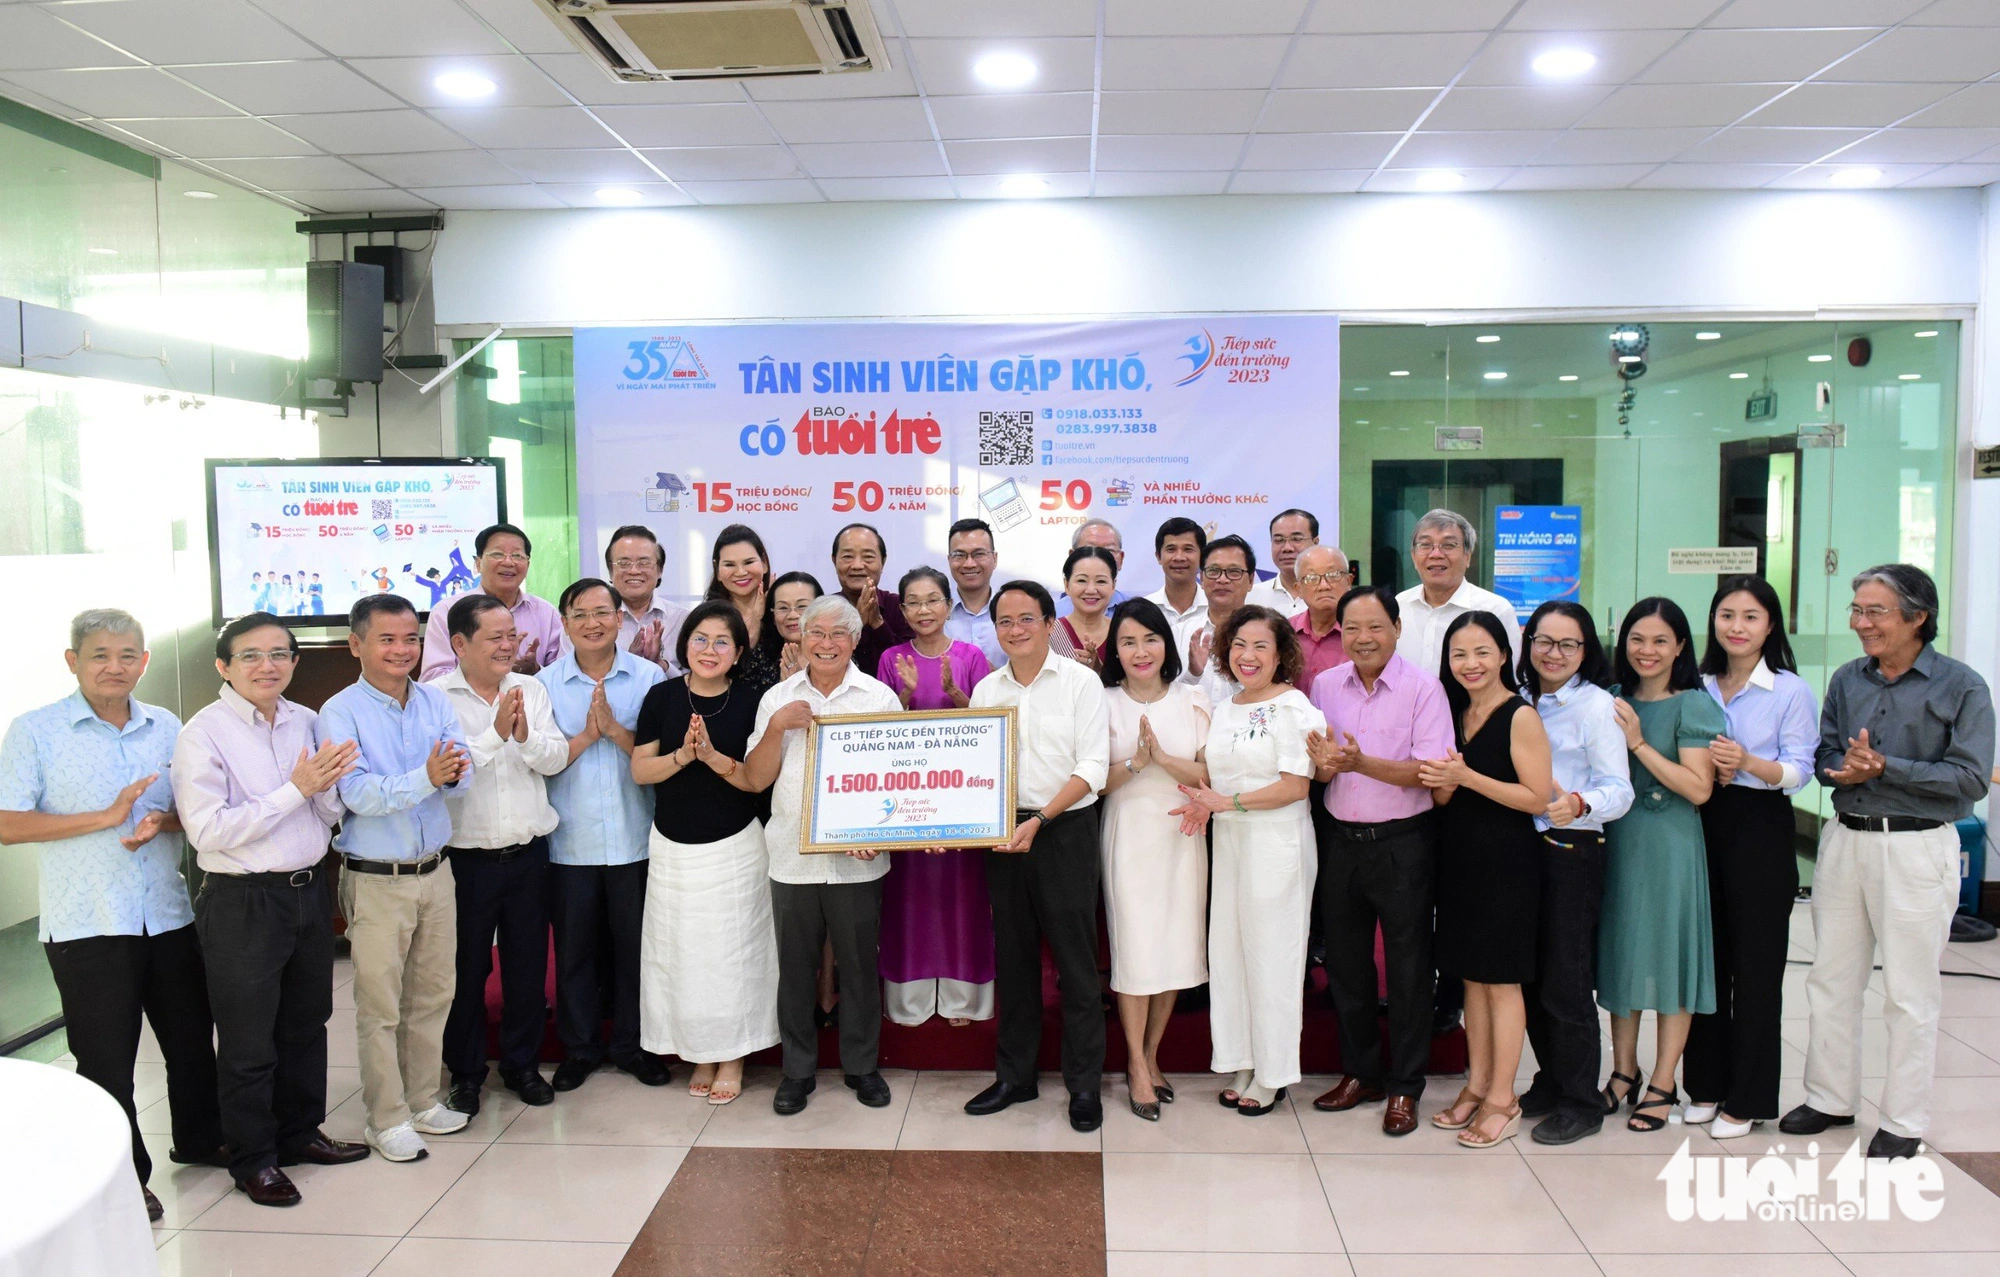 1.5 billion VND is supported by the Quang Nam - Da Nang Tak Club Relay for poor new students - Photo: Duyen Phan